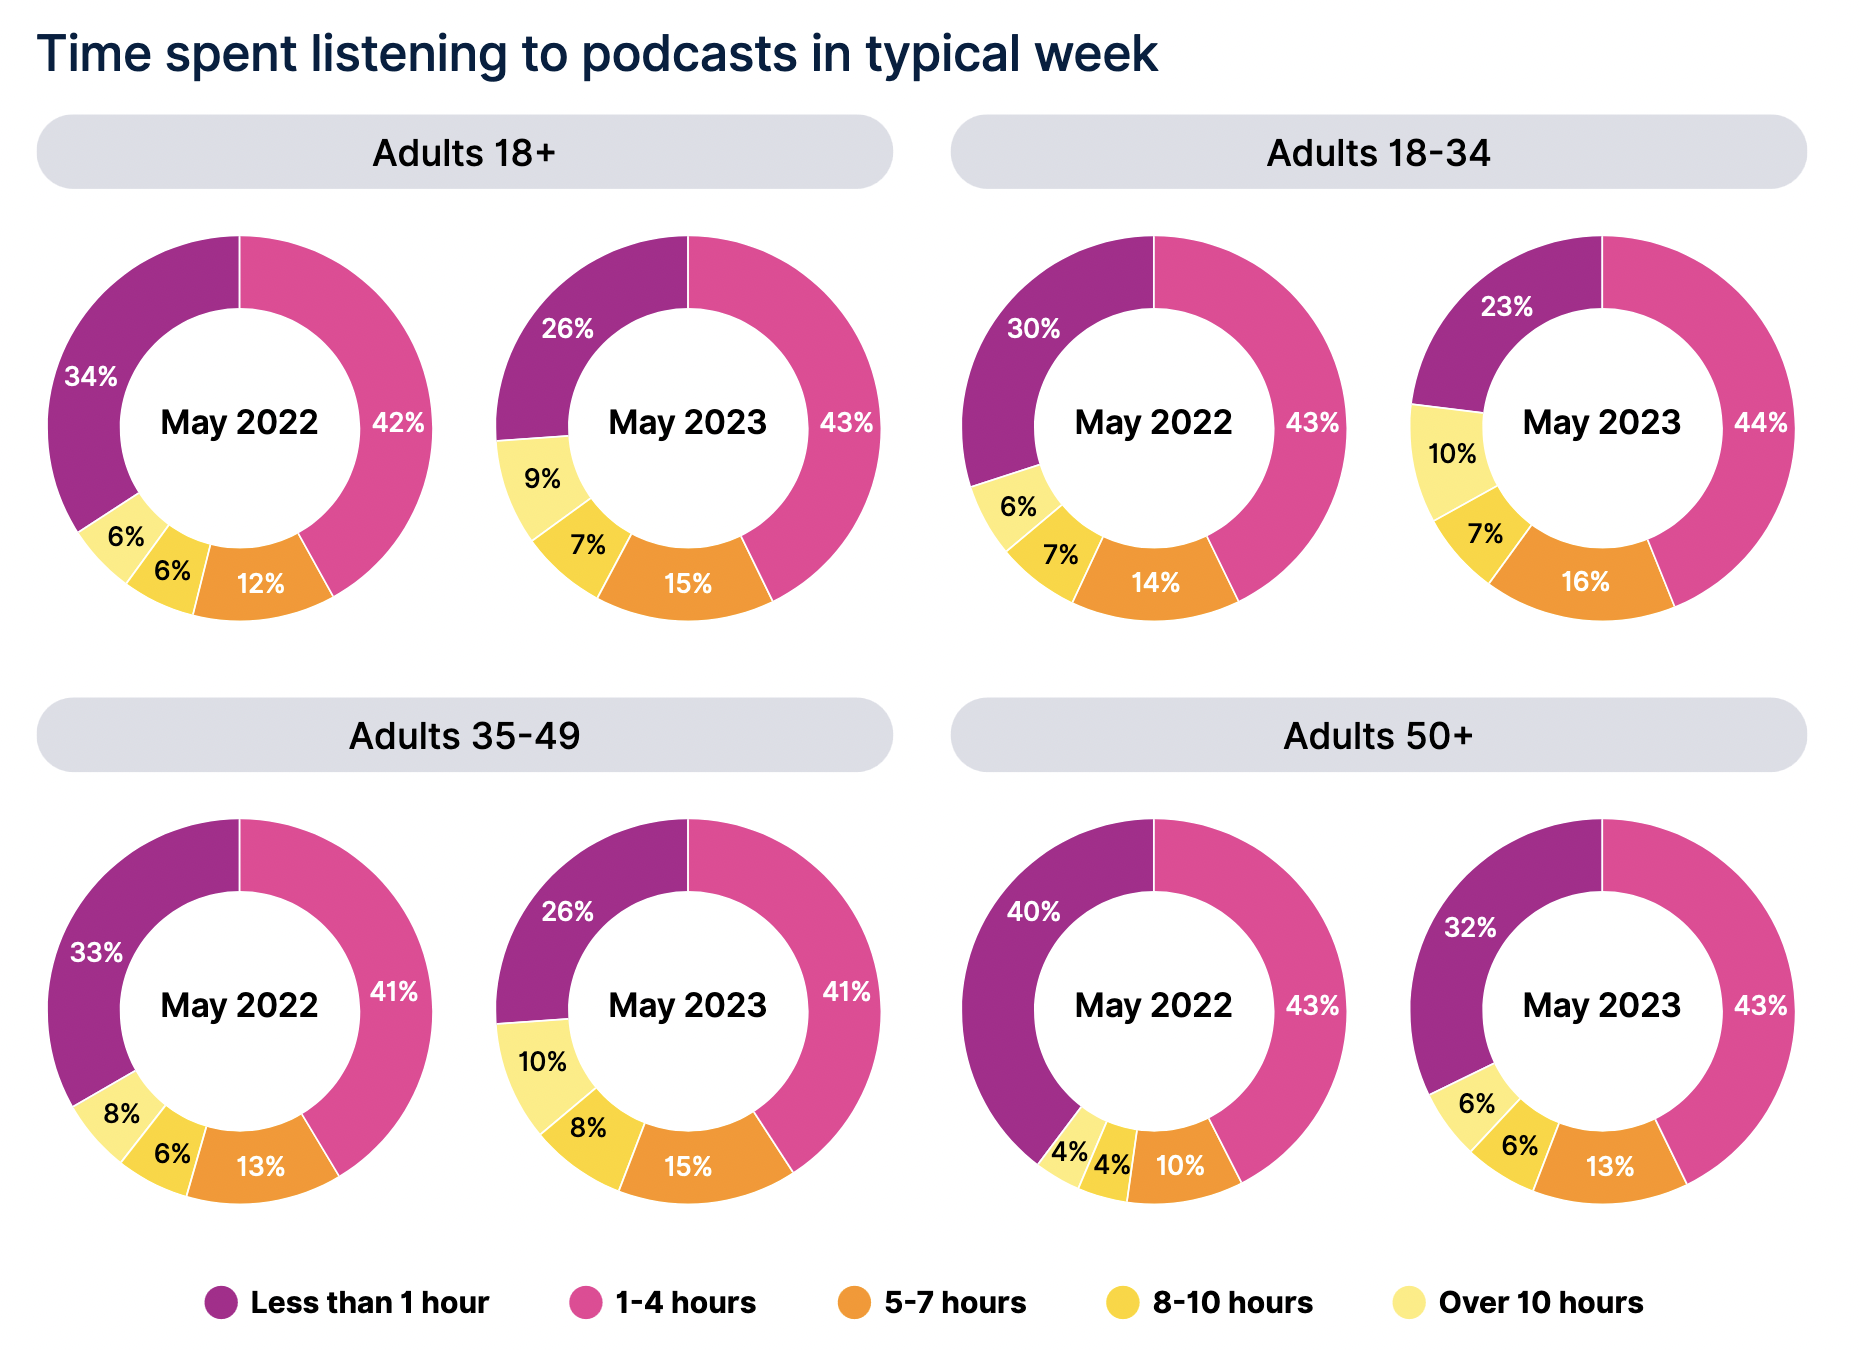 Source : Nielsen Scarborough Podcast Buying Power, R2 2021 (May 2022) to R2 2022 (May 2023), Adults 18+ Copyright © 2023 The Nielsen Company (US), LLC